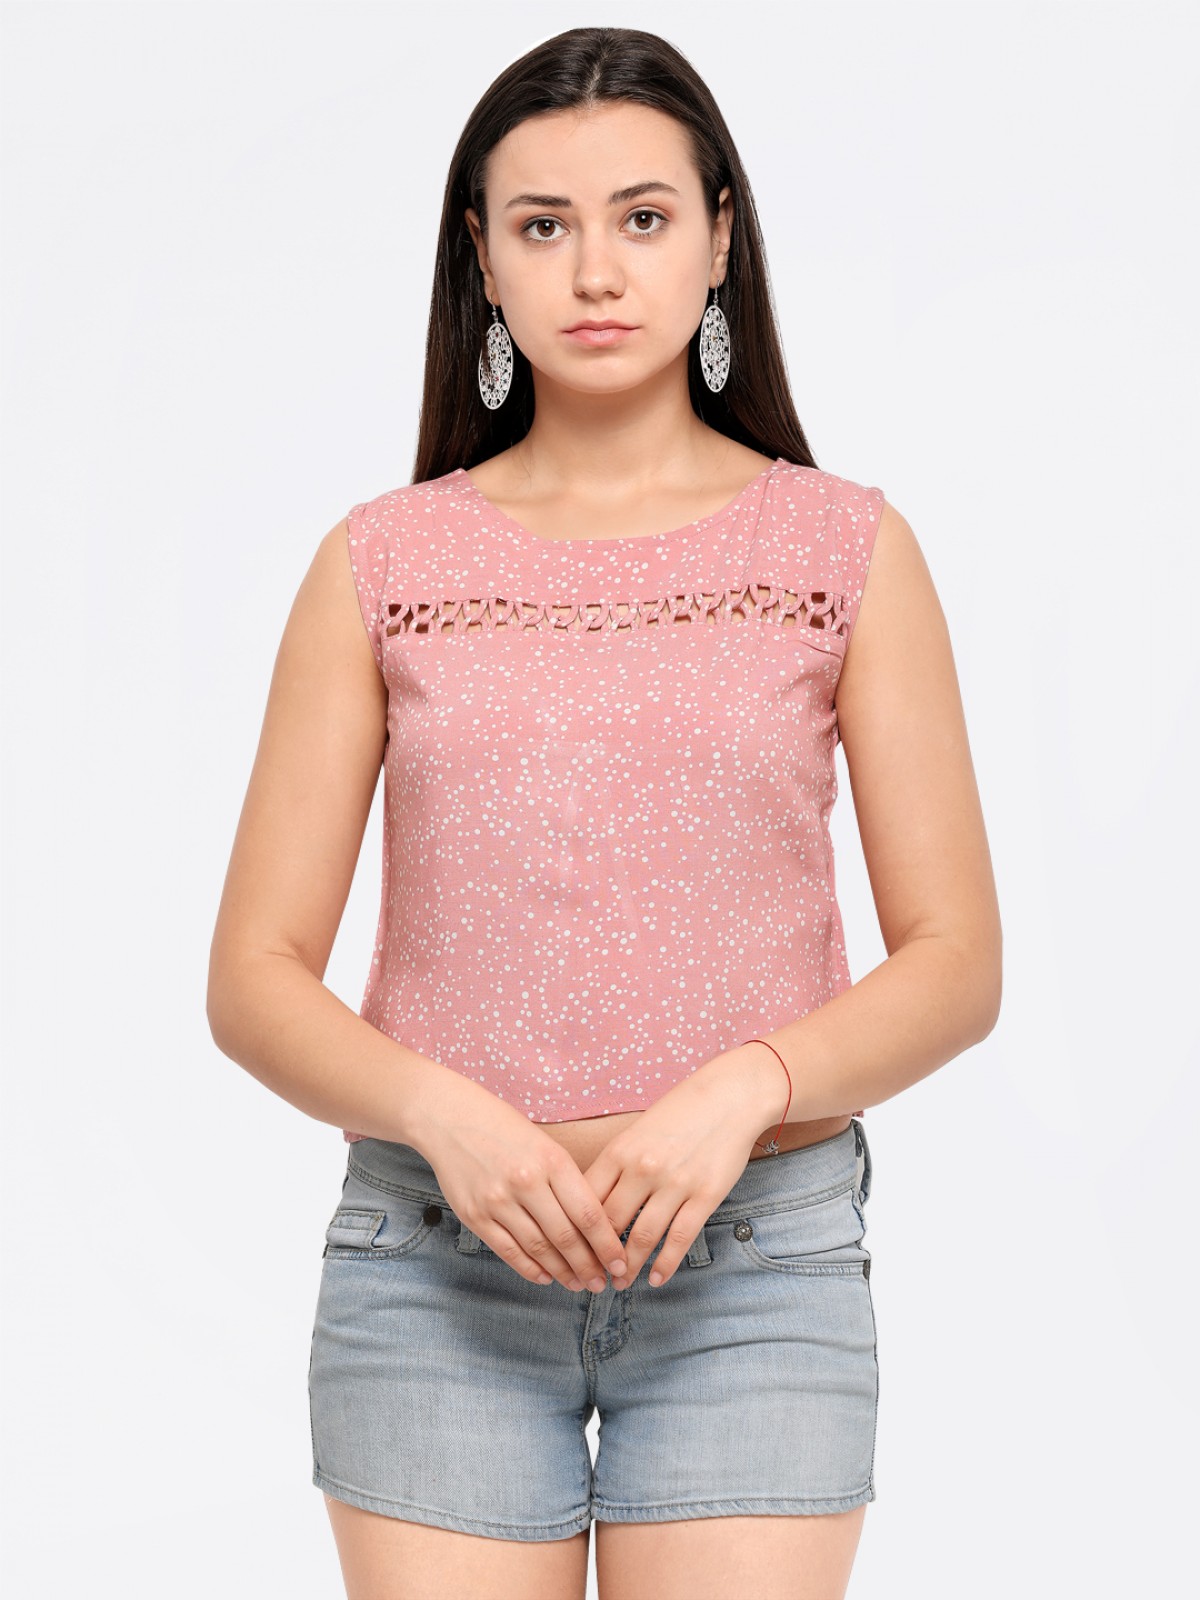 Pink White Polkadot Chained Crop Top